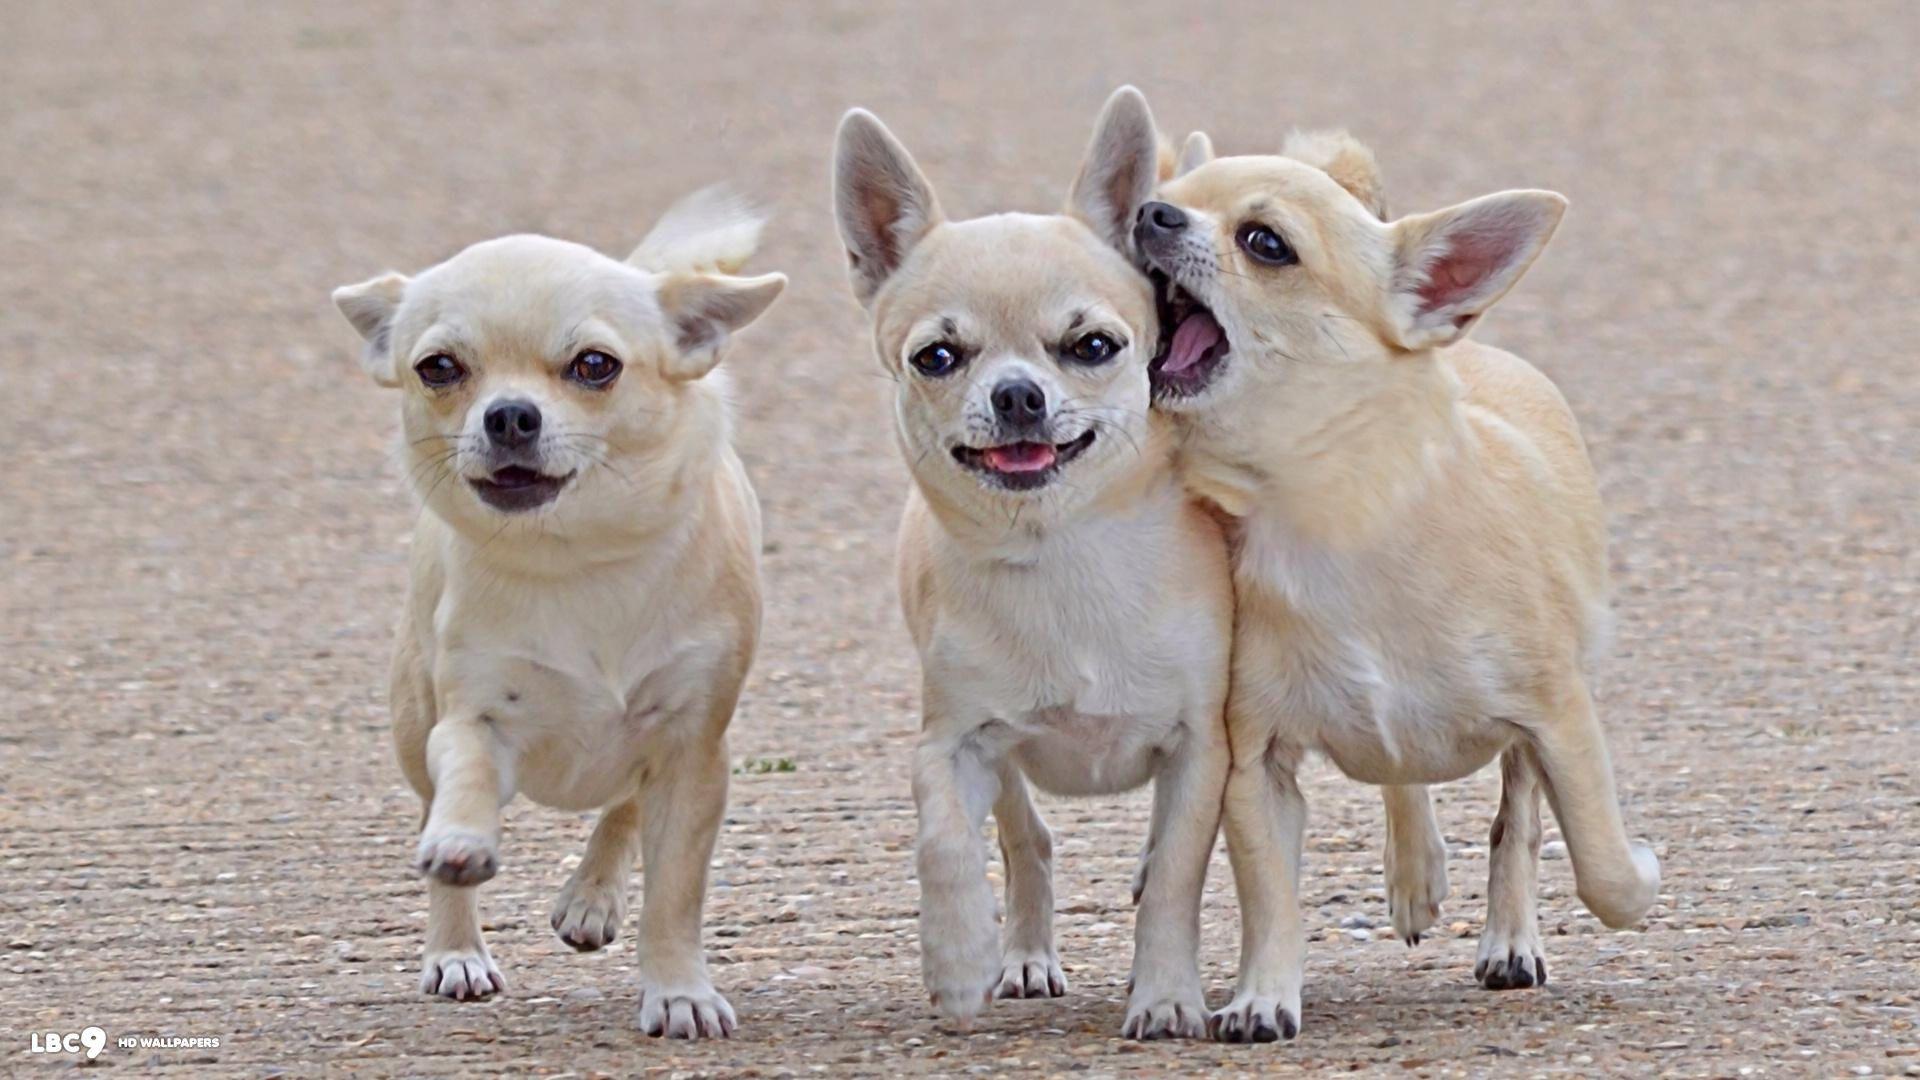 Download wallpaper 800x1200 chihuahua three friends comrades dog walk  iphone 4s4 for parallax hd background